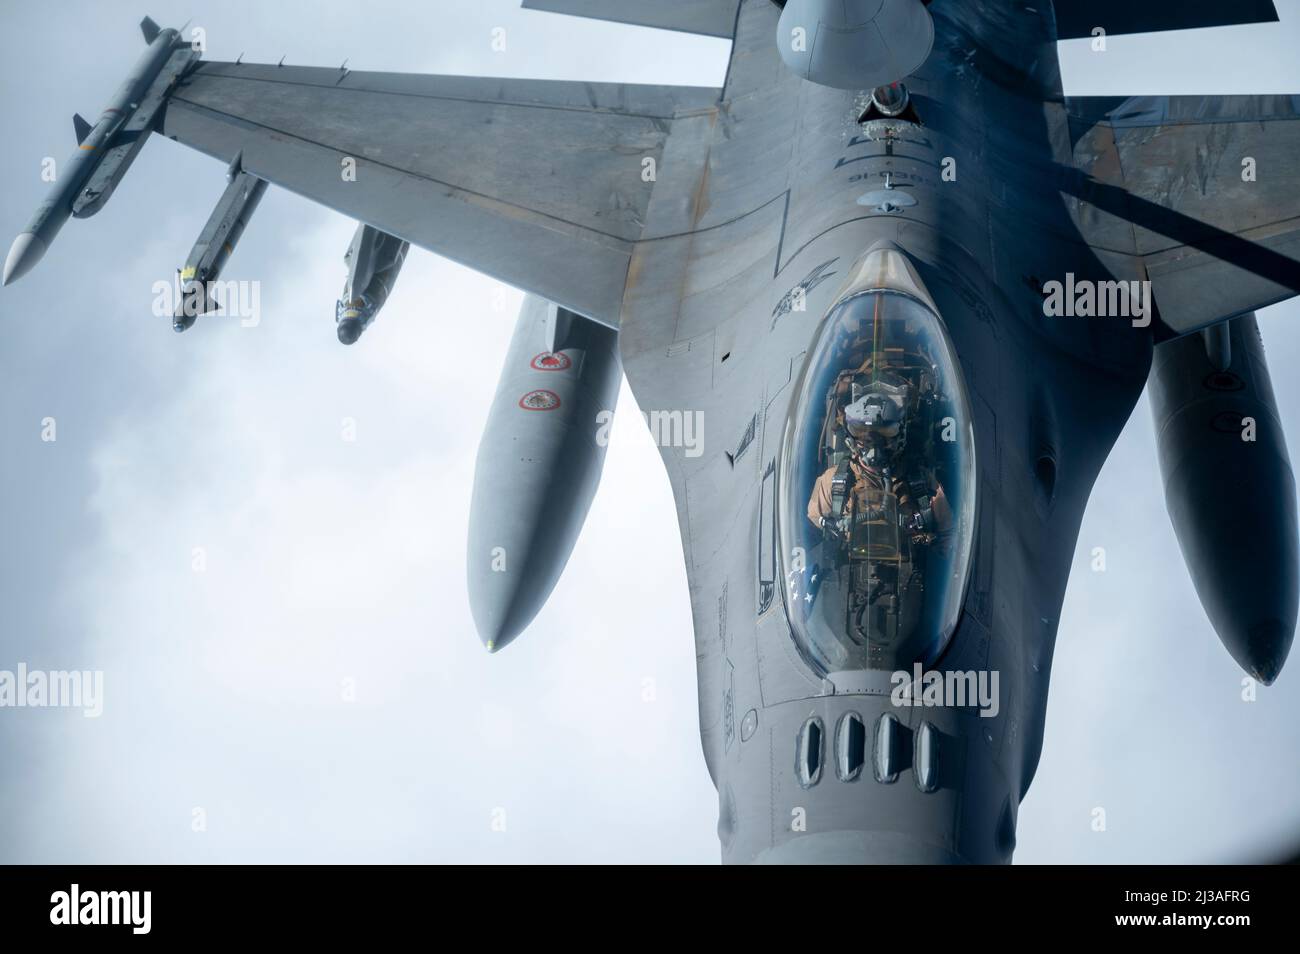 A U.S. Air Force F-16 Fighting Falcon pilot receives fuel from a U.S. Air Force KC-135 Stratotanker over the U.S. Central Command area of responsibility March 24th, 2022. The F-16 Fighting Falcon delivers airpower and showcases Ninth Air Force (Air Forces Central)’s commitment to security and stability in the USCENTCOM AOR. (U.S. Air Force photo by Staff Sgt. Frank Rohrig) Stock Photo